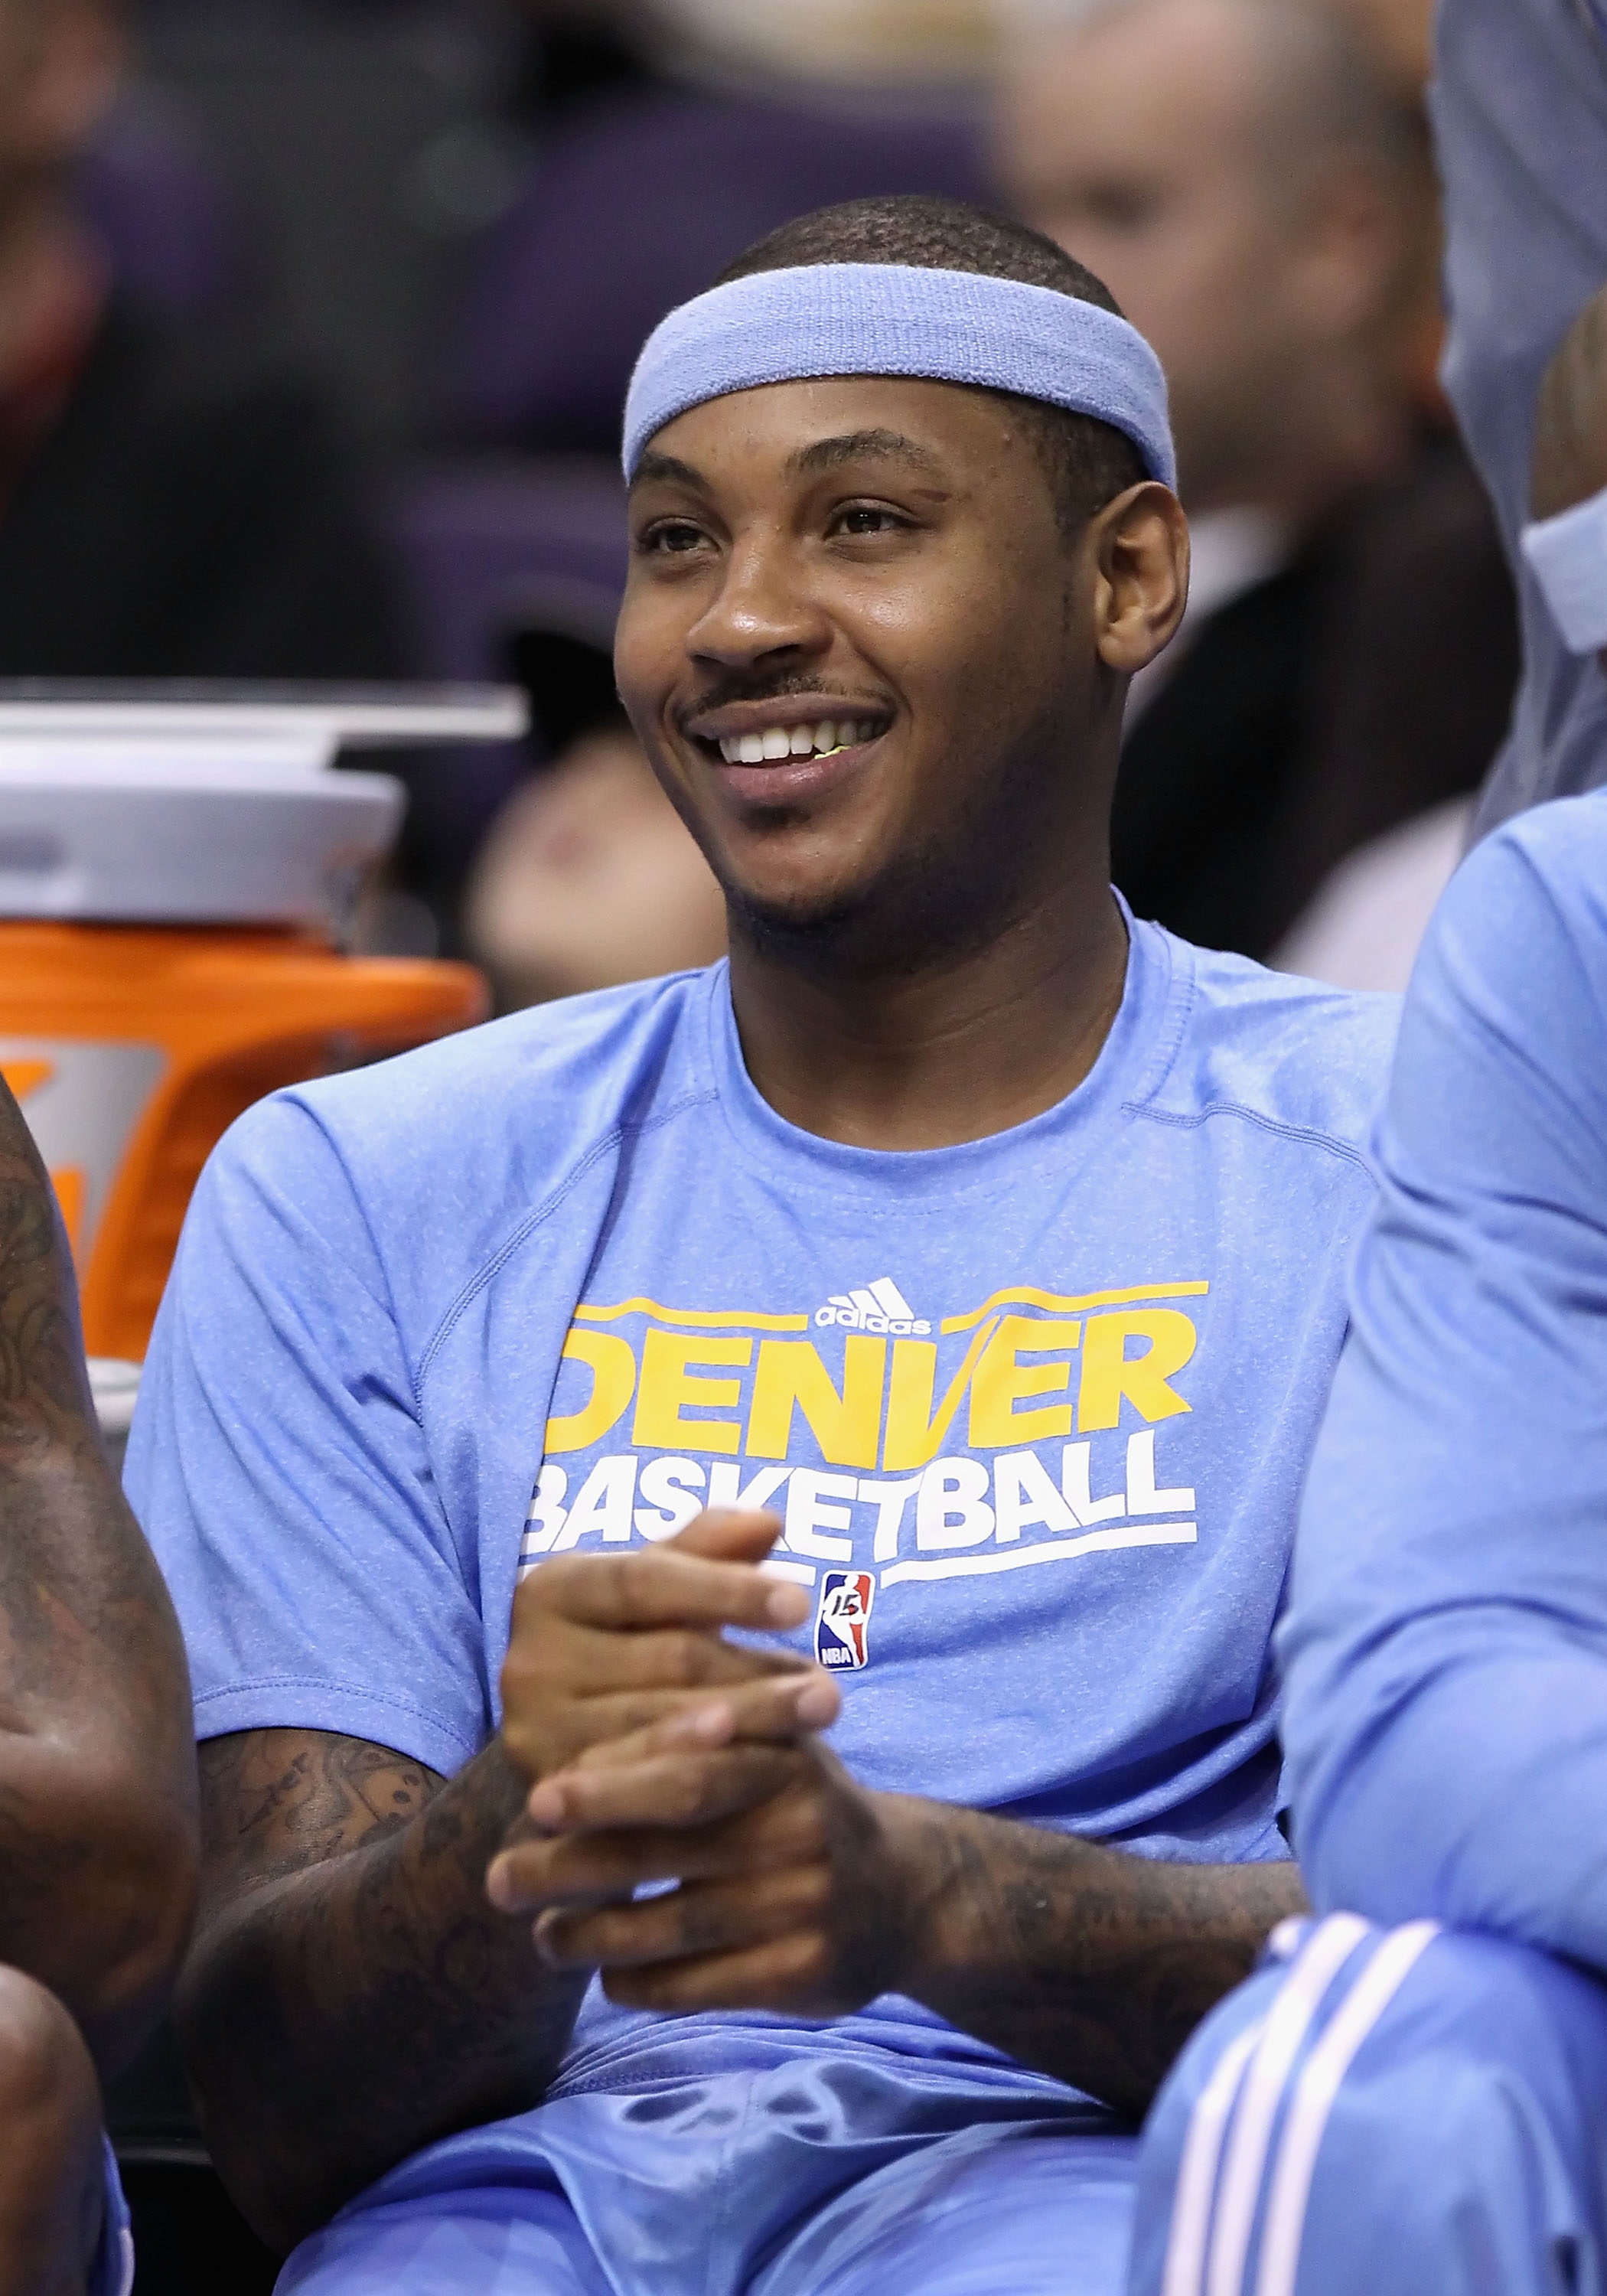 Denver Nuggets forward Carmelo Anthony smiles during warm ups